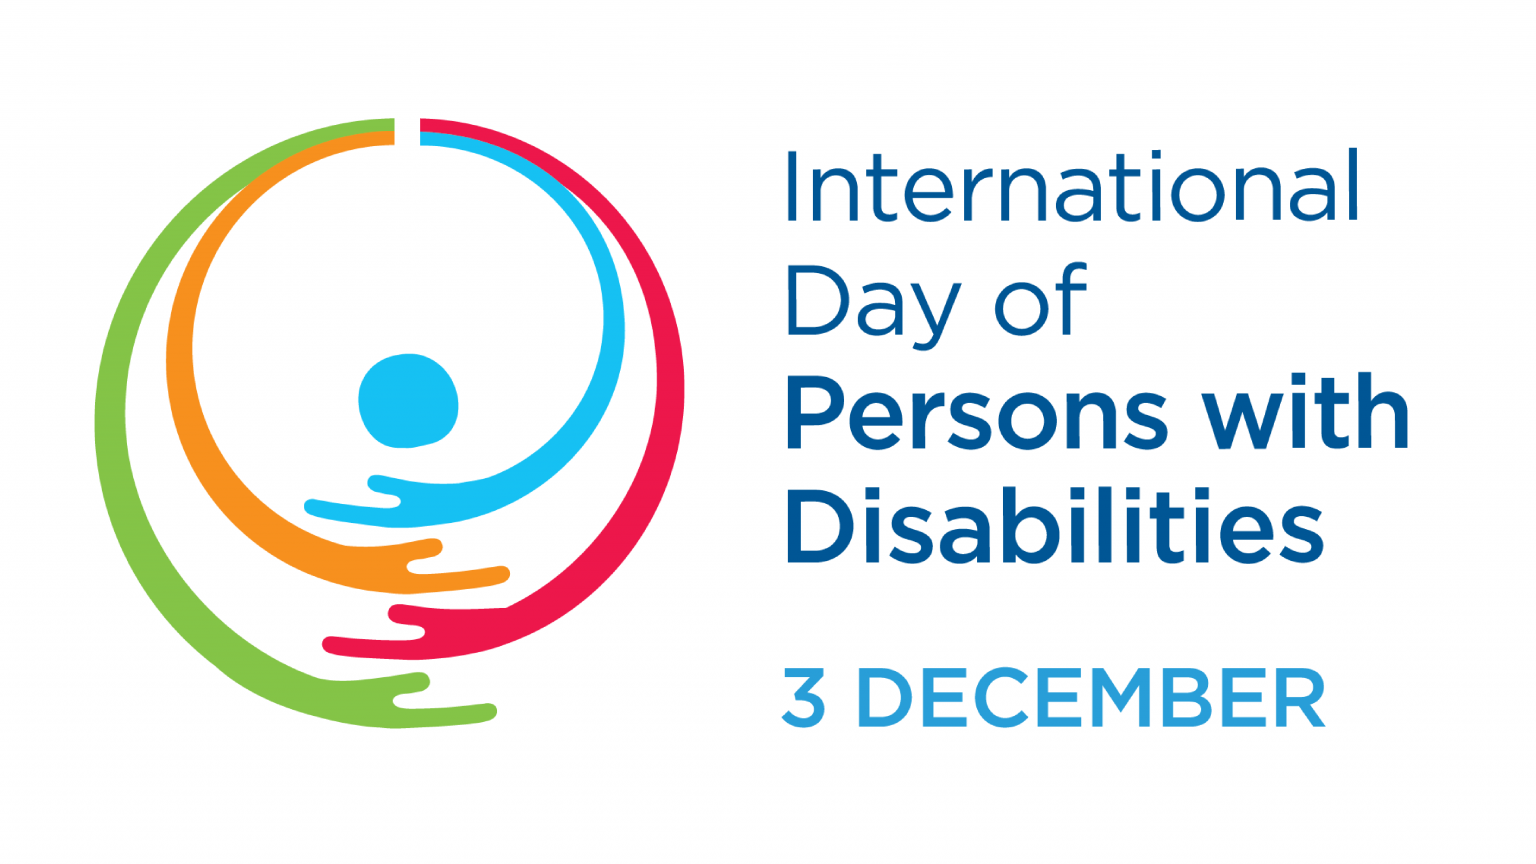 Official logo for International Day of Persons with Disabilities